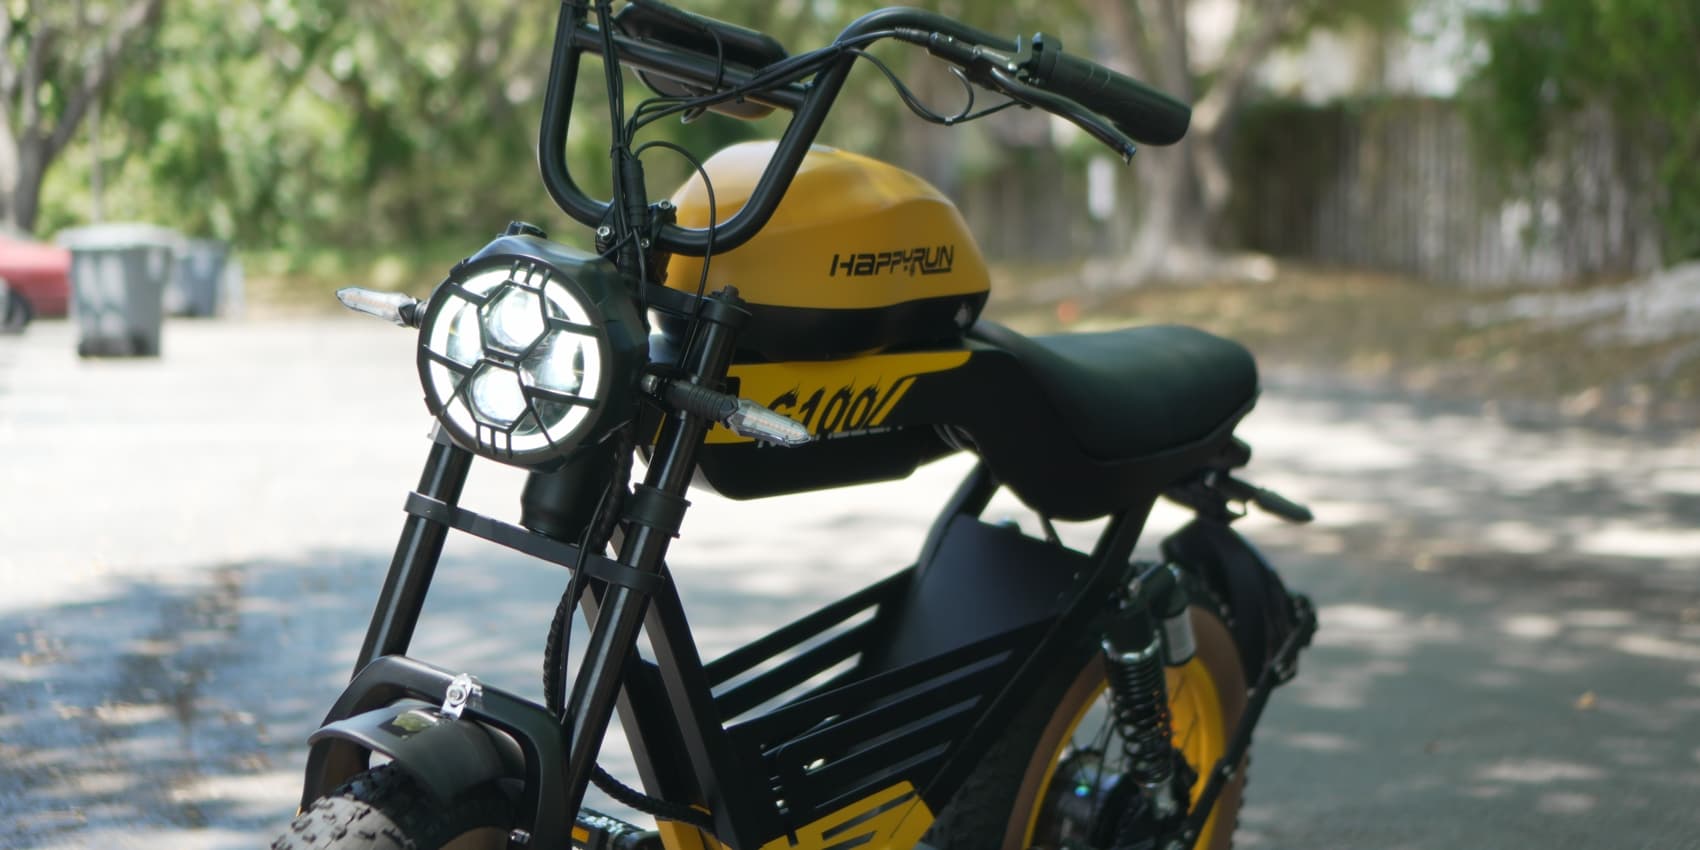 Tank G100 review: This epic thing is the most motorcycle e-bike I’ve tested yet – Electrek.co